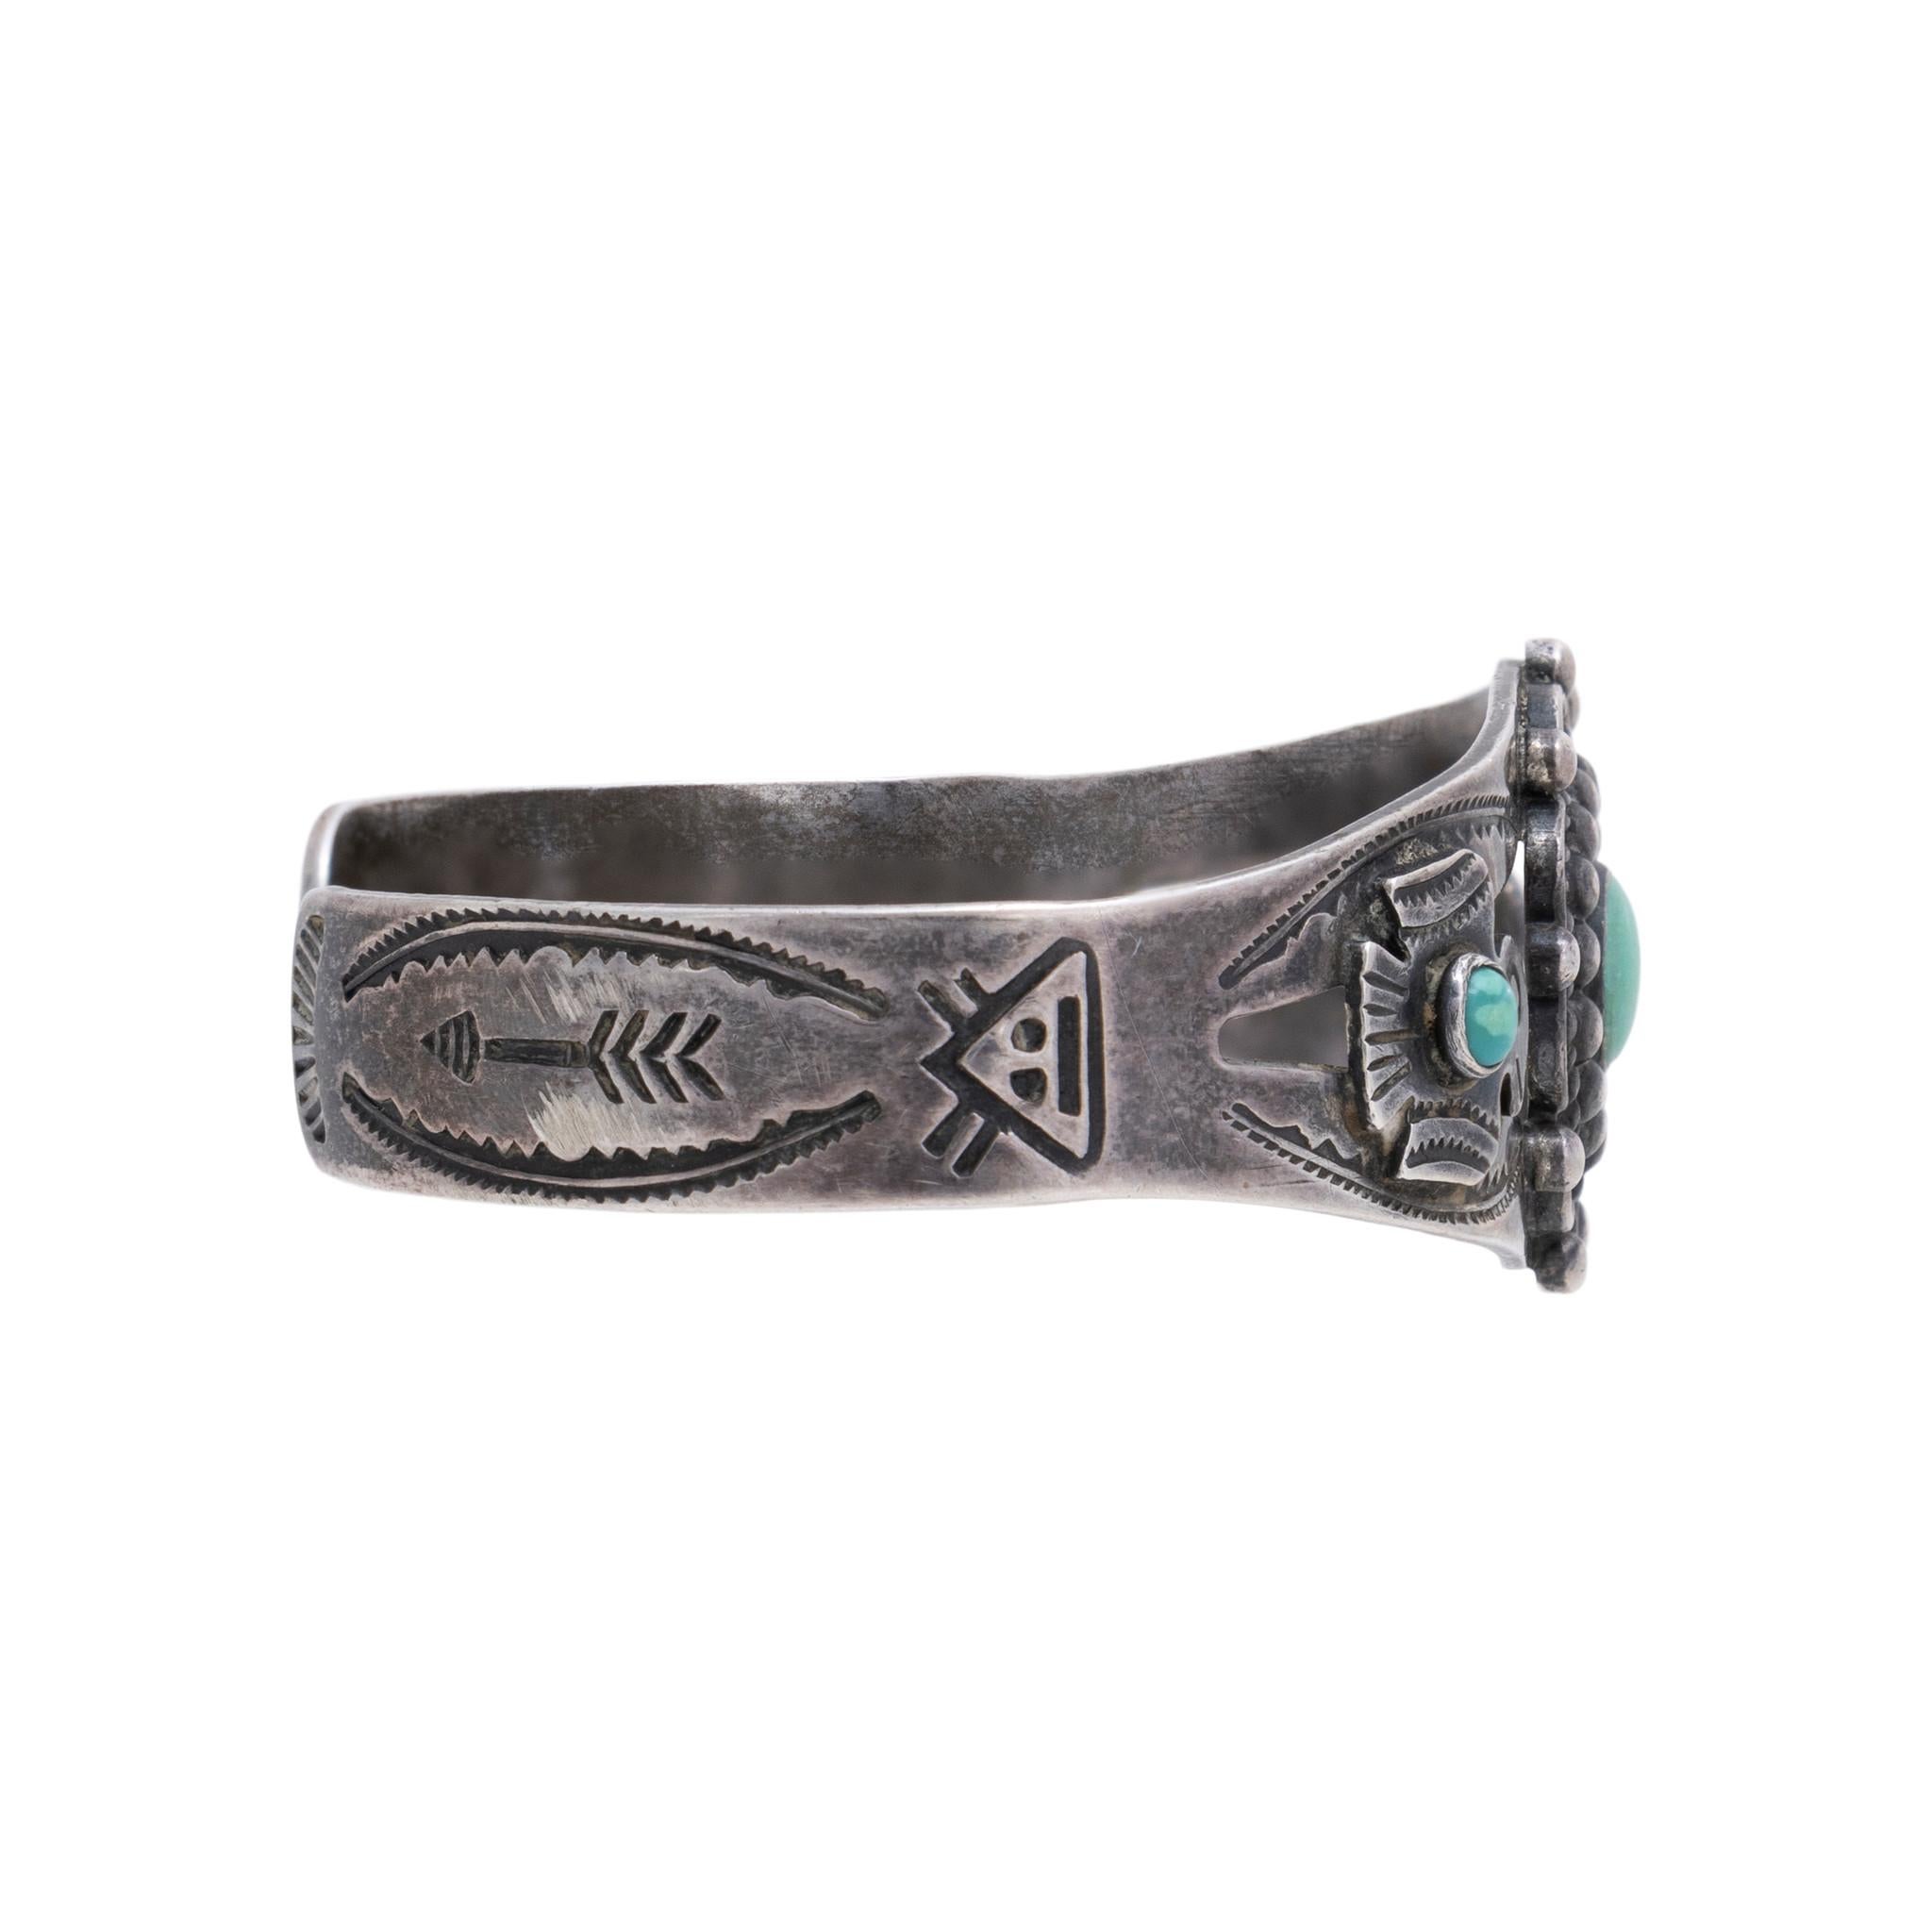 Native American Navajo Indian turquoise and sterling silver Fred Harvey bracelet. This lovely bracelet has three snake-eye turquoise cabochons, surrounded by dainty cutouts, silver thunderbird applique, twisted wire, and hand stamping on the cuff, a